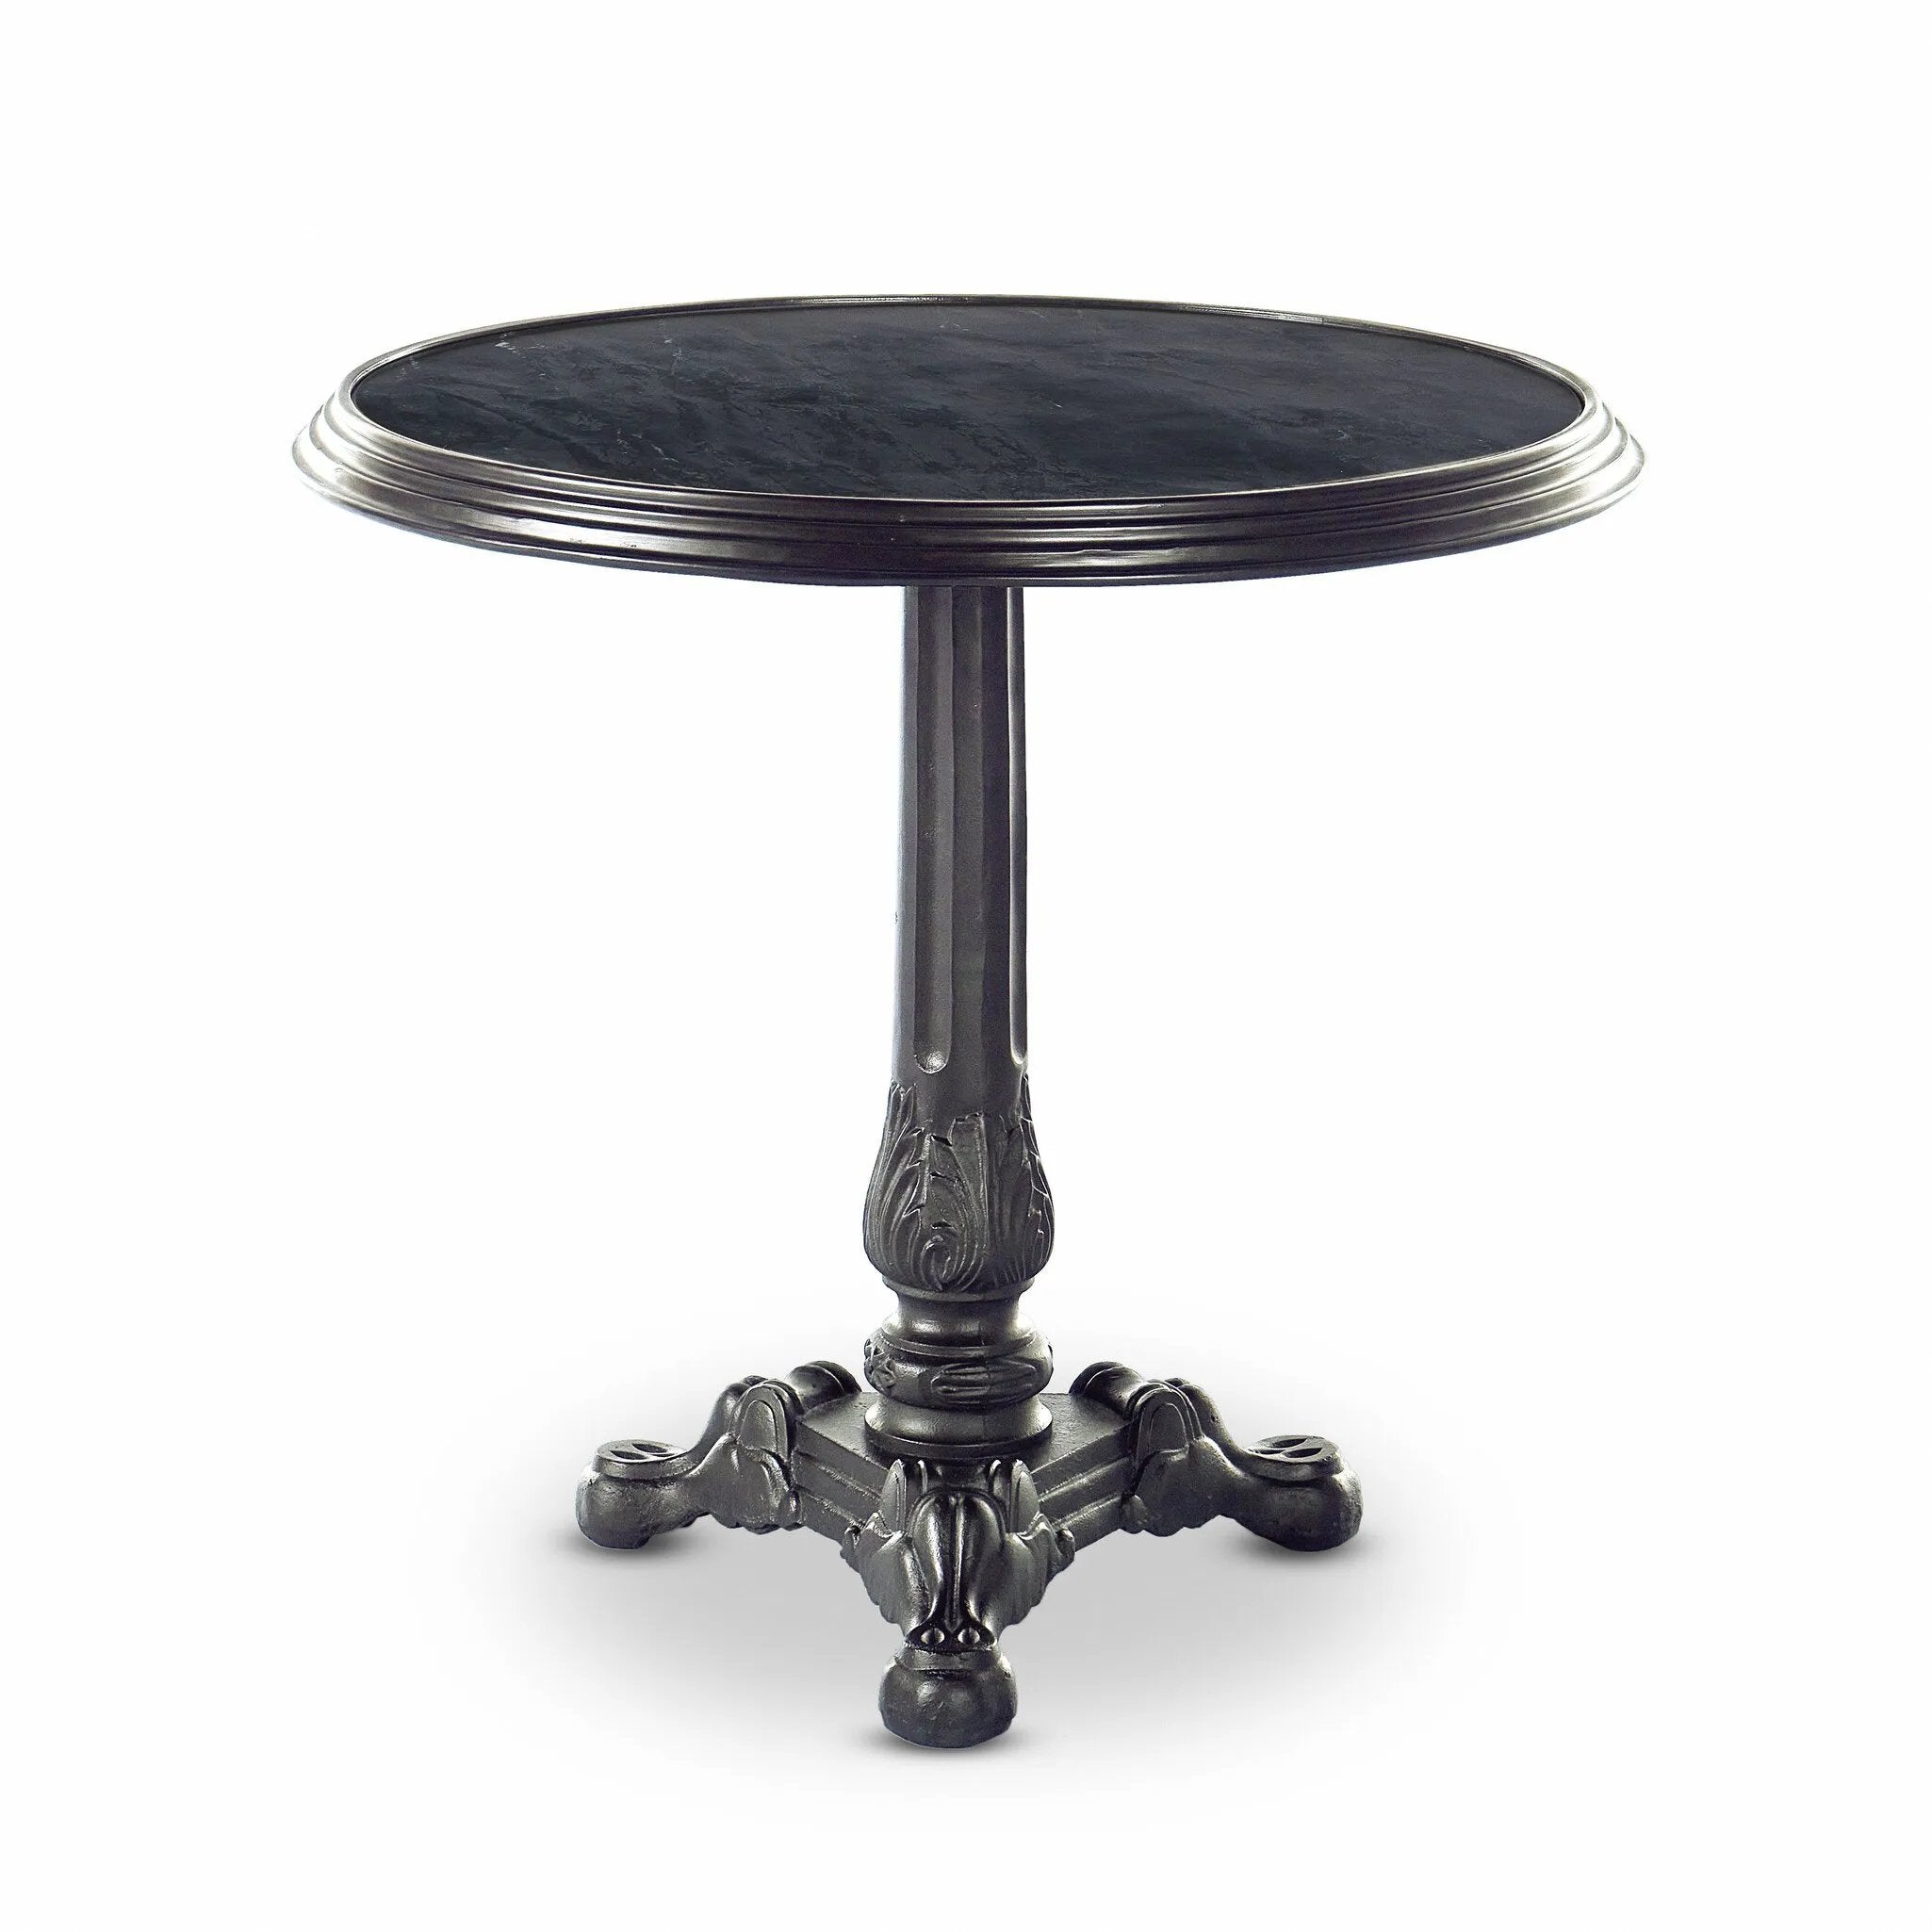 For a fresh take on classic Parisian styling, an ornate cast iron base is topped with black marble.Collection: Rockwel Amethyst Home provides interior design, new home construction design consulting, vintage area rugs, and lighting in the Nashville metro area.